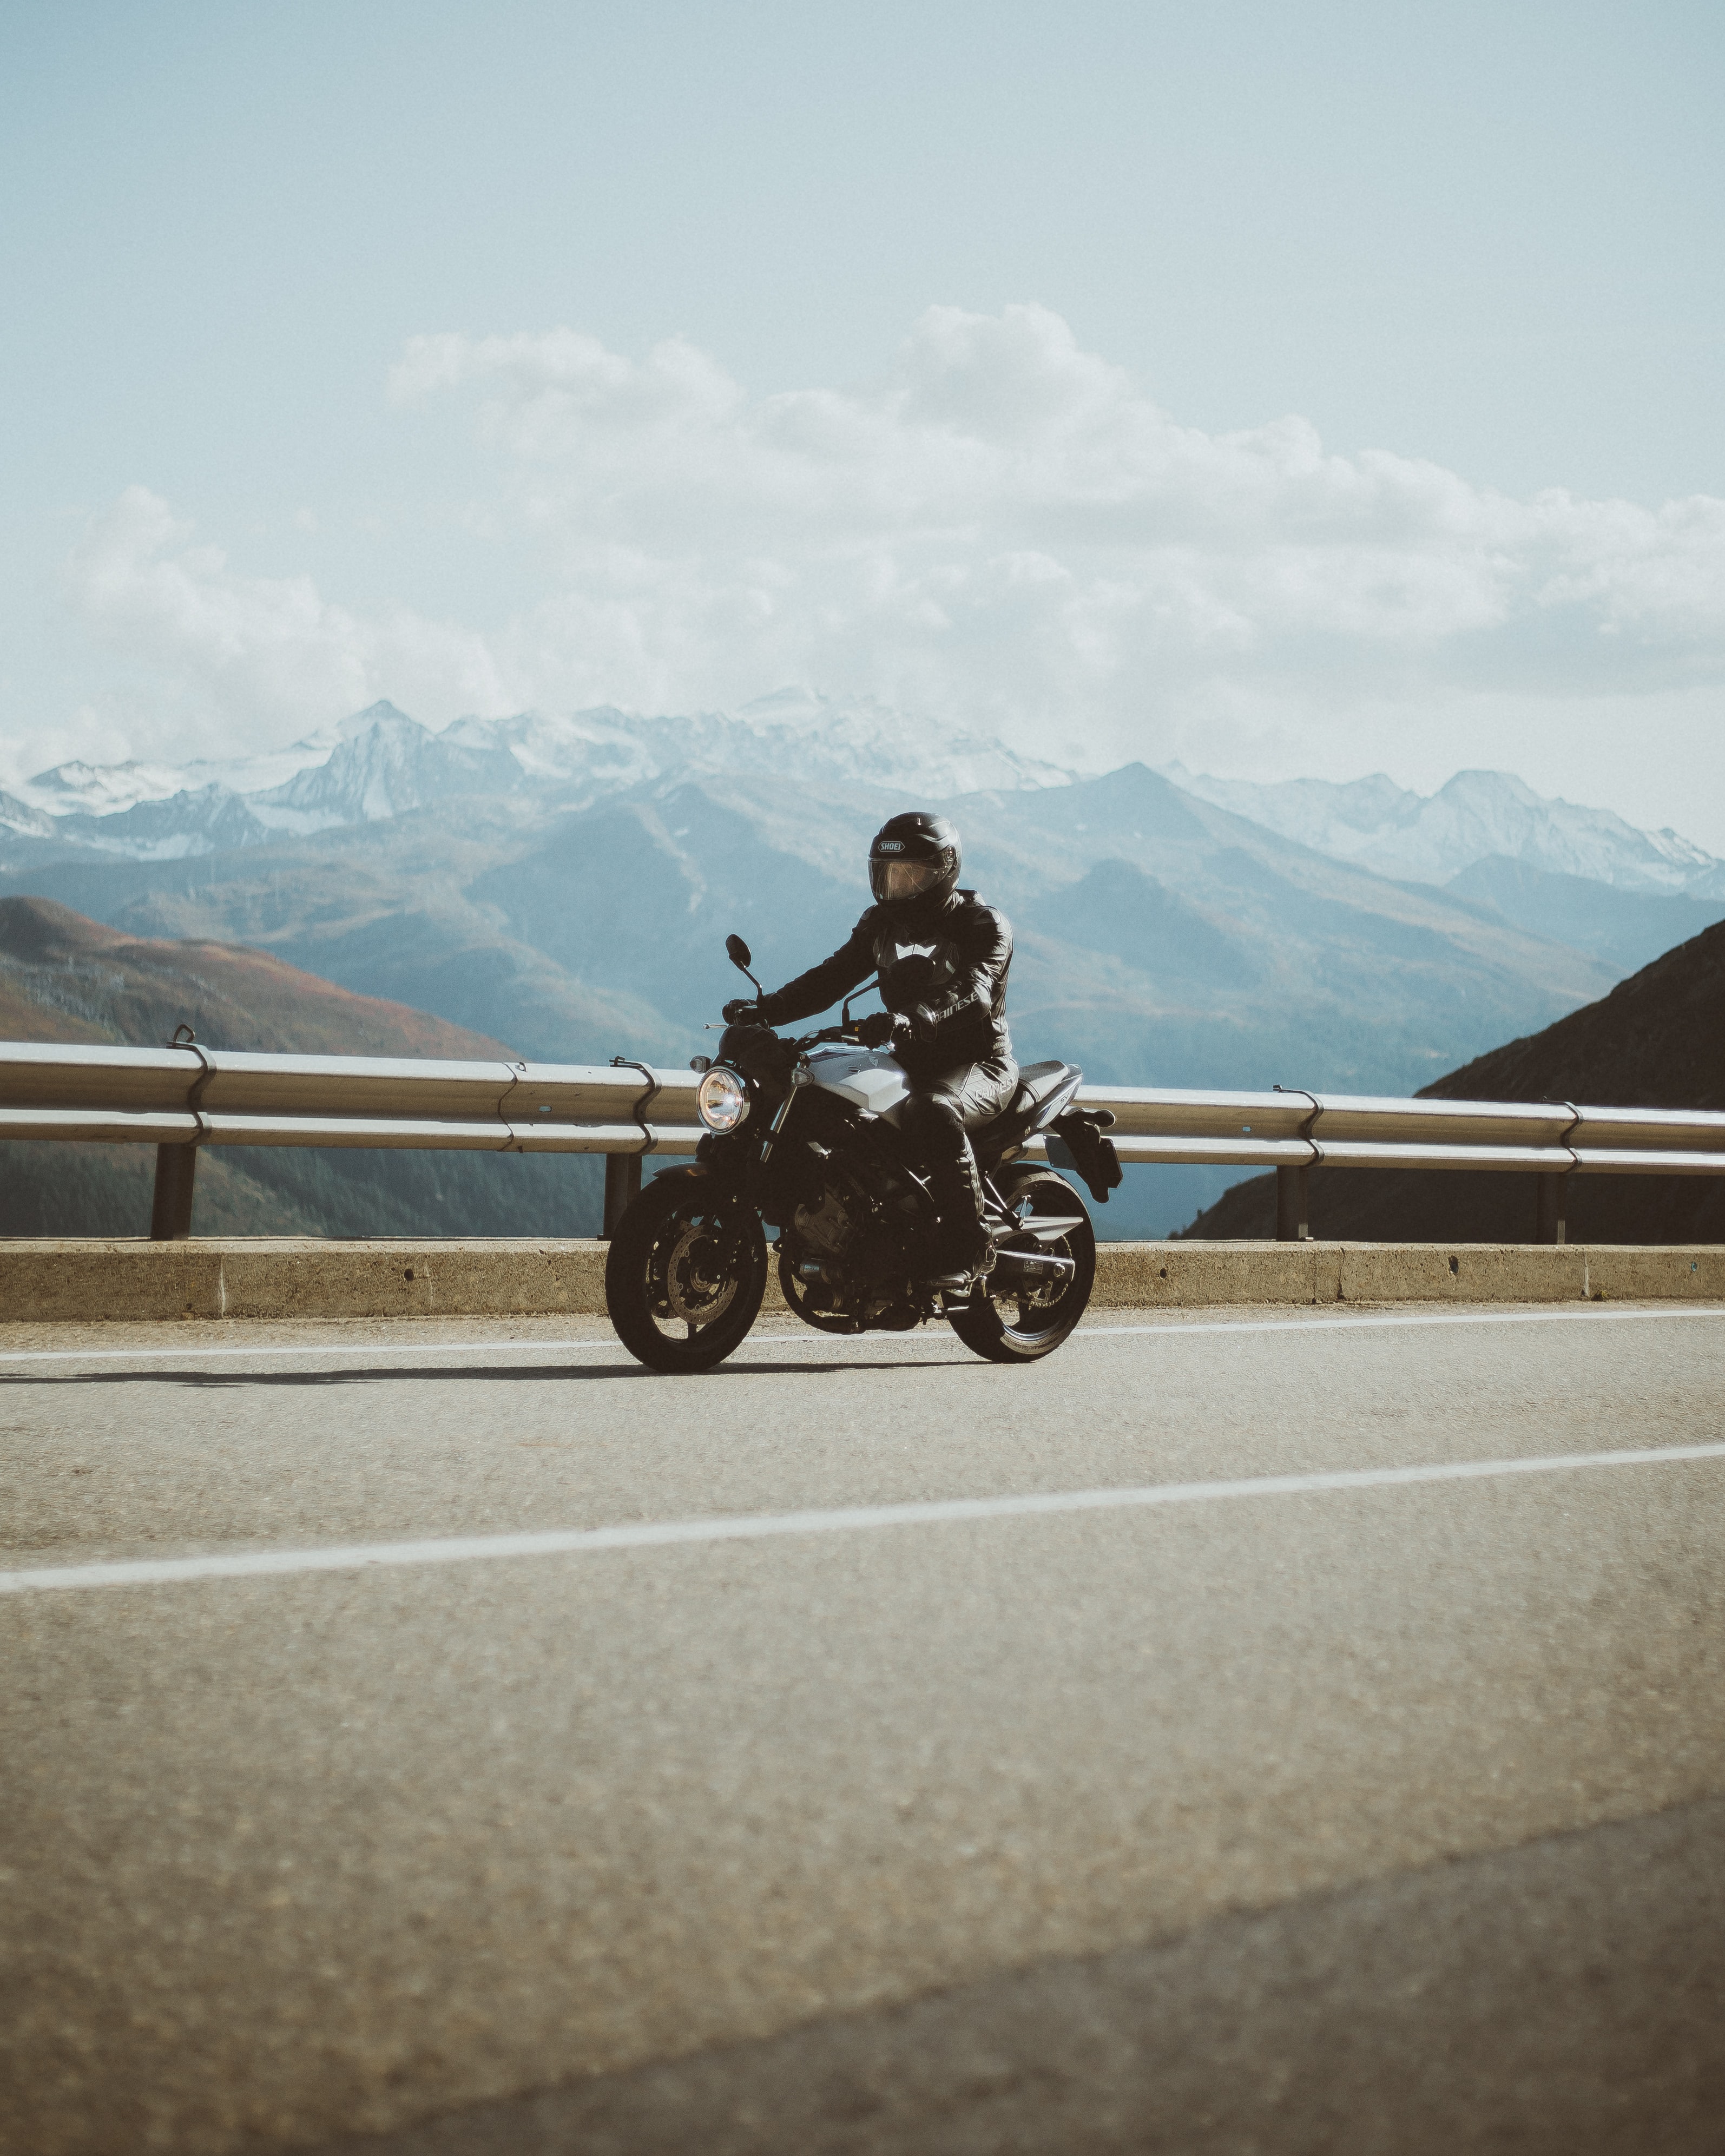 63347 Screensavers and Wallpapers Motorcyclist for phone. Download mountains, motorcycles, road, motorcyclist, motorcycle pictures for free